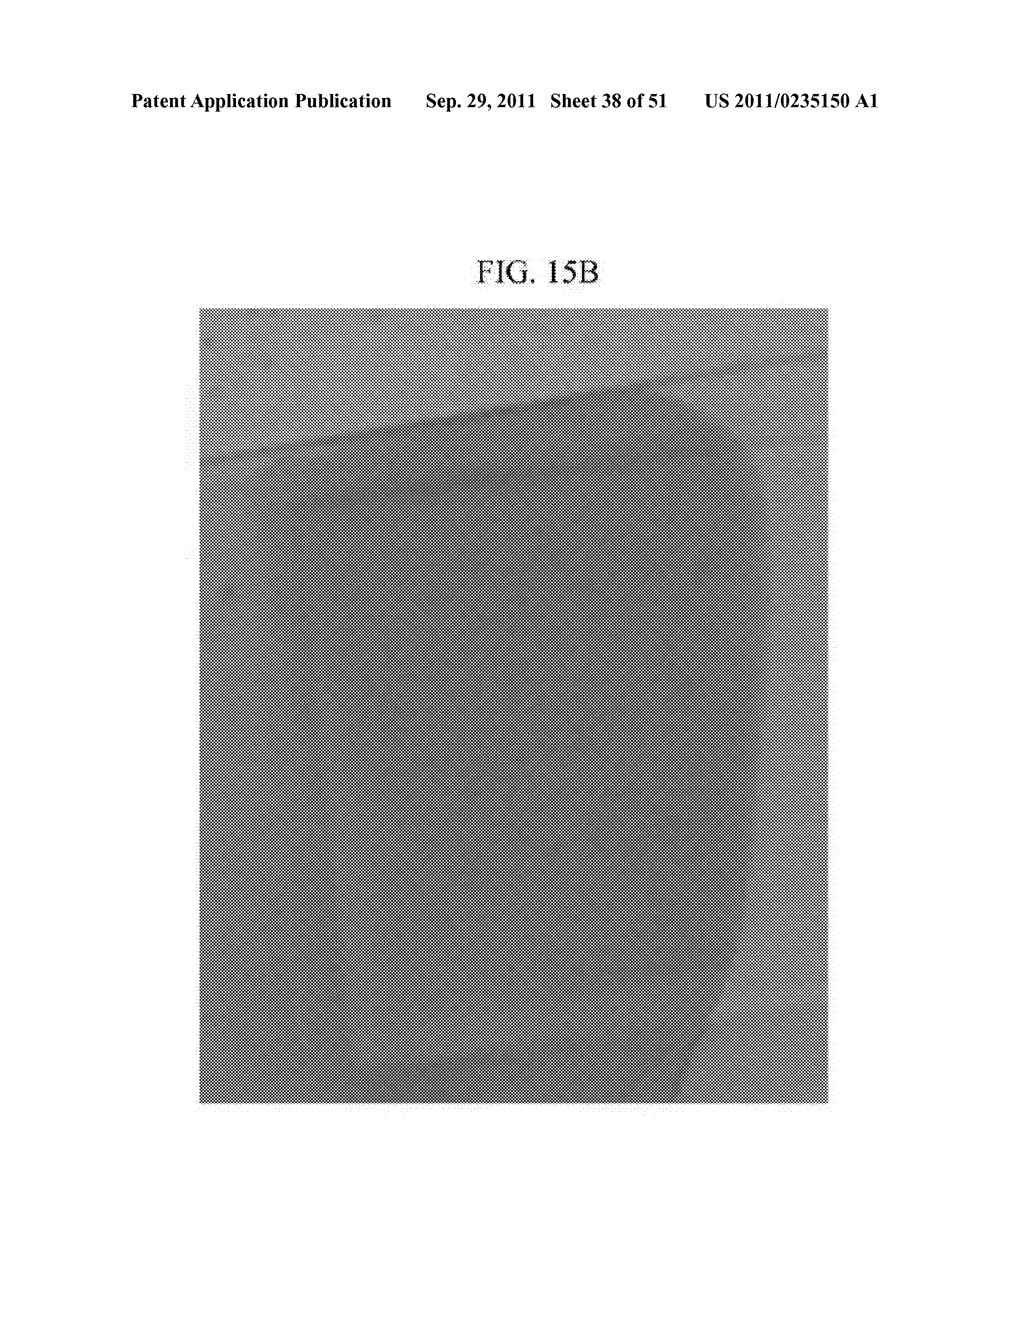 ELECTROCHROMIC MATERIAL AND ELECTROCHROMIC DEVICE INCLUDING THE SAME - diagram, schematic, and image 39